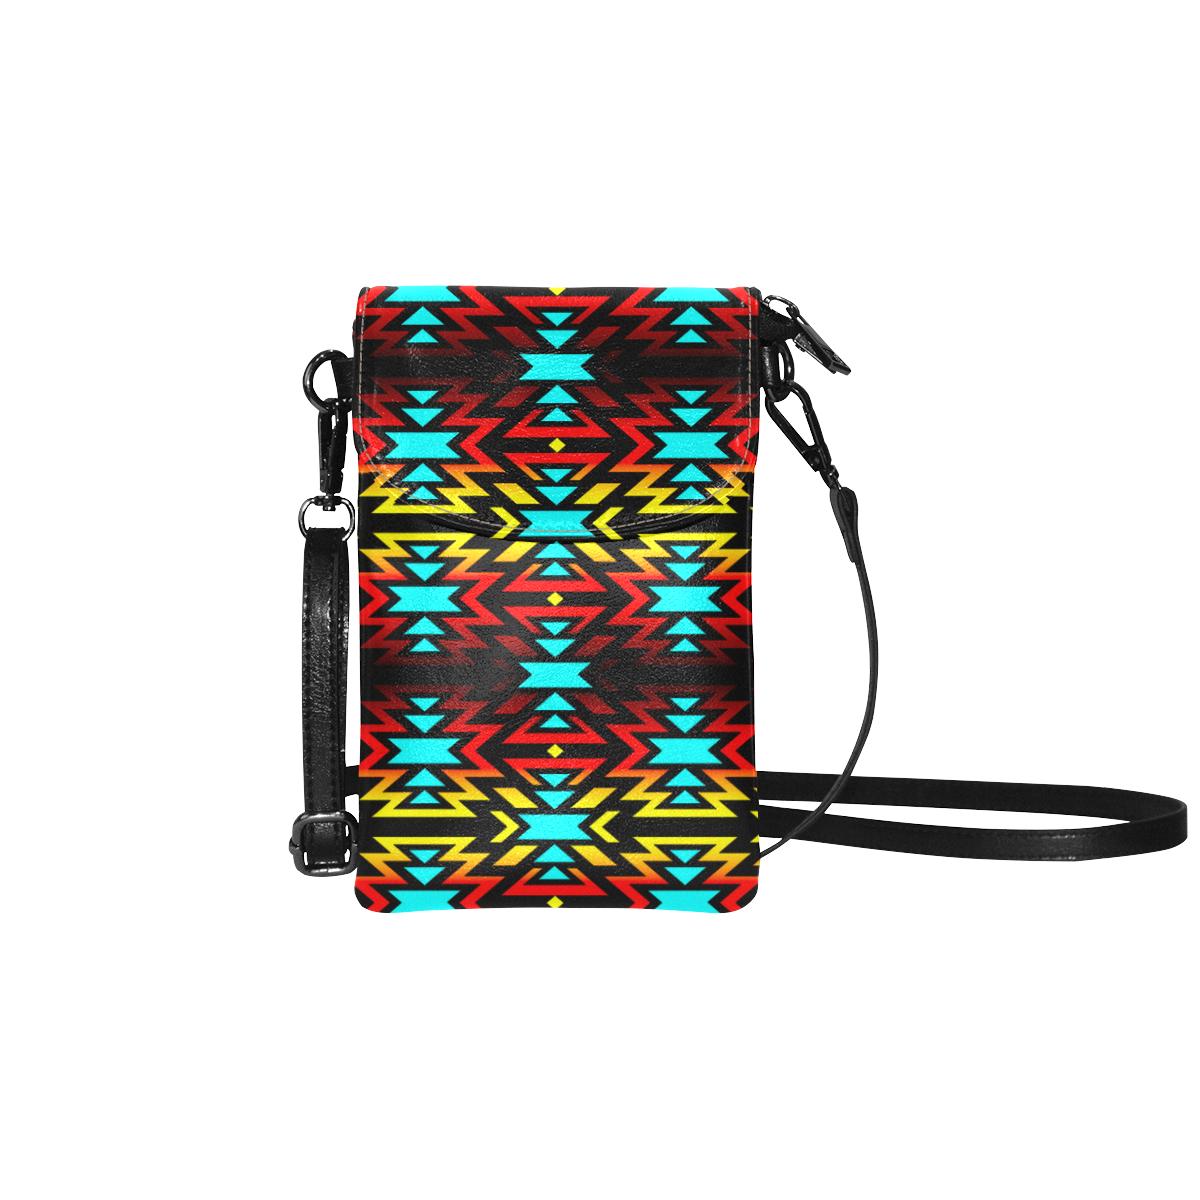 Black Fire and Turquoise Small Cell Phone Purse (Model 1711) Small Cell Phone Purse (1711) e-joyer 